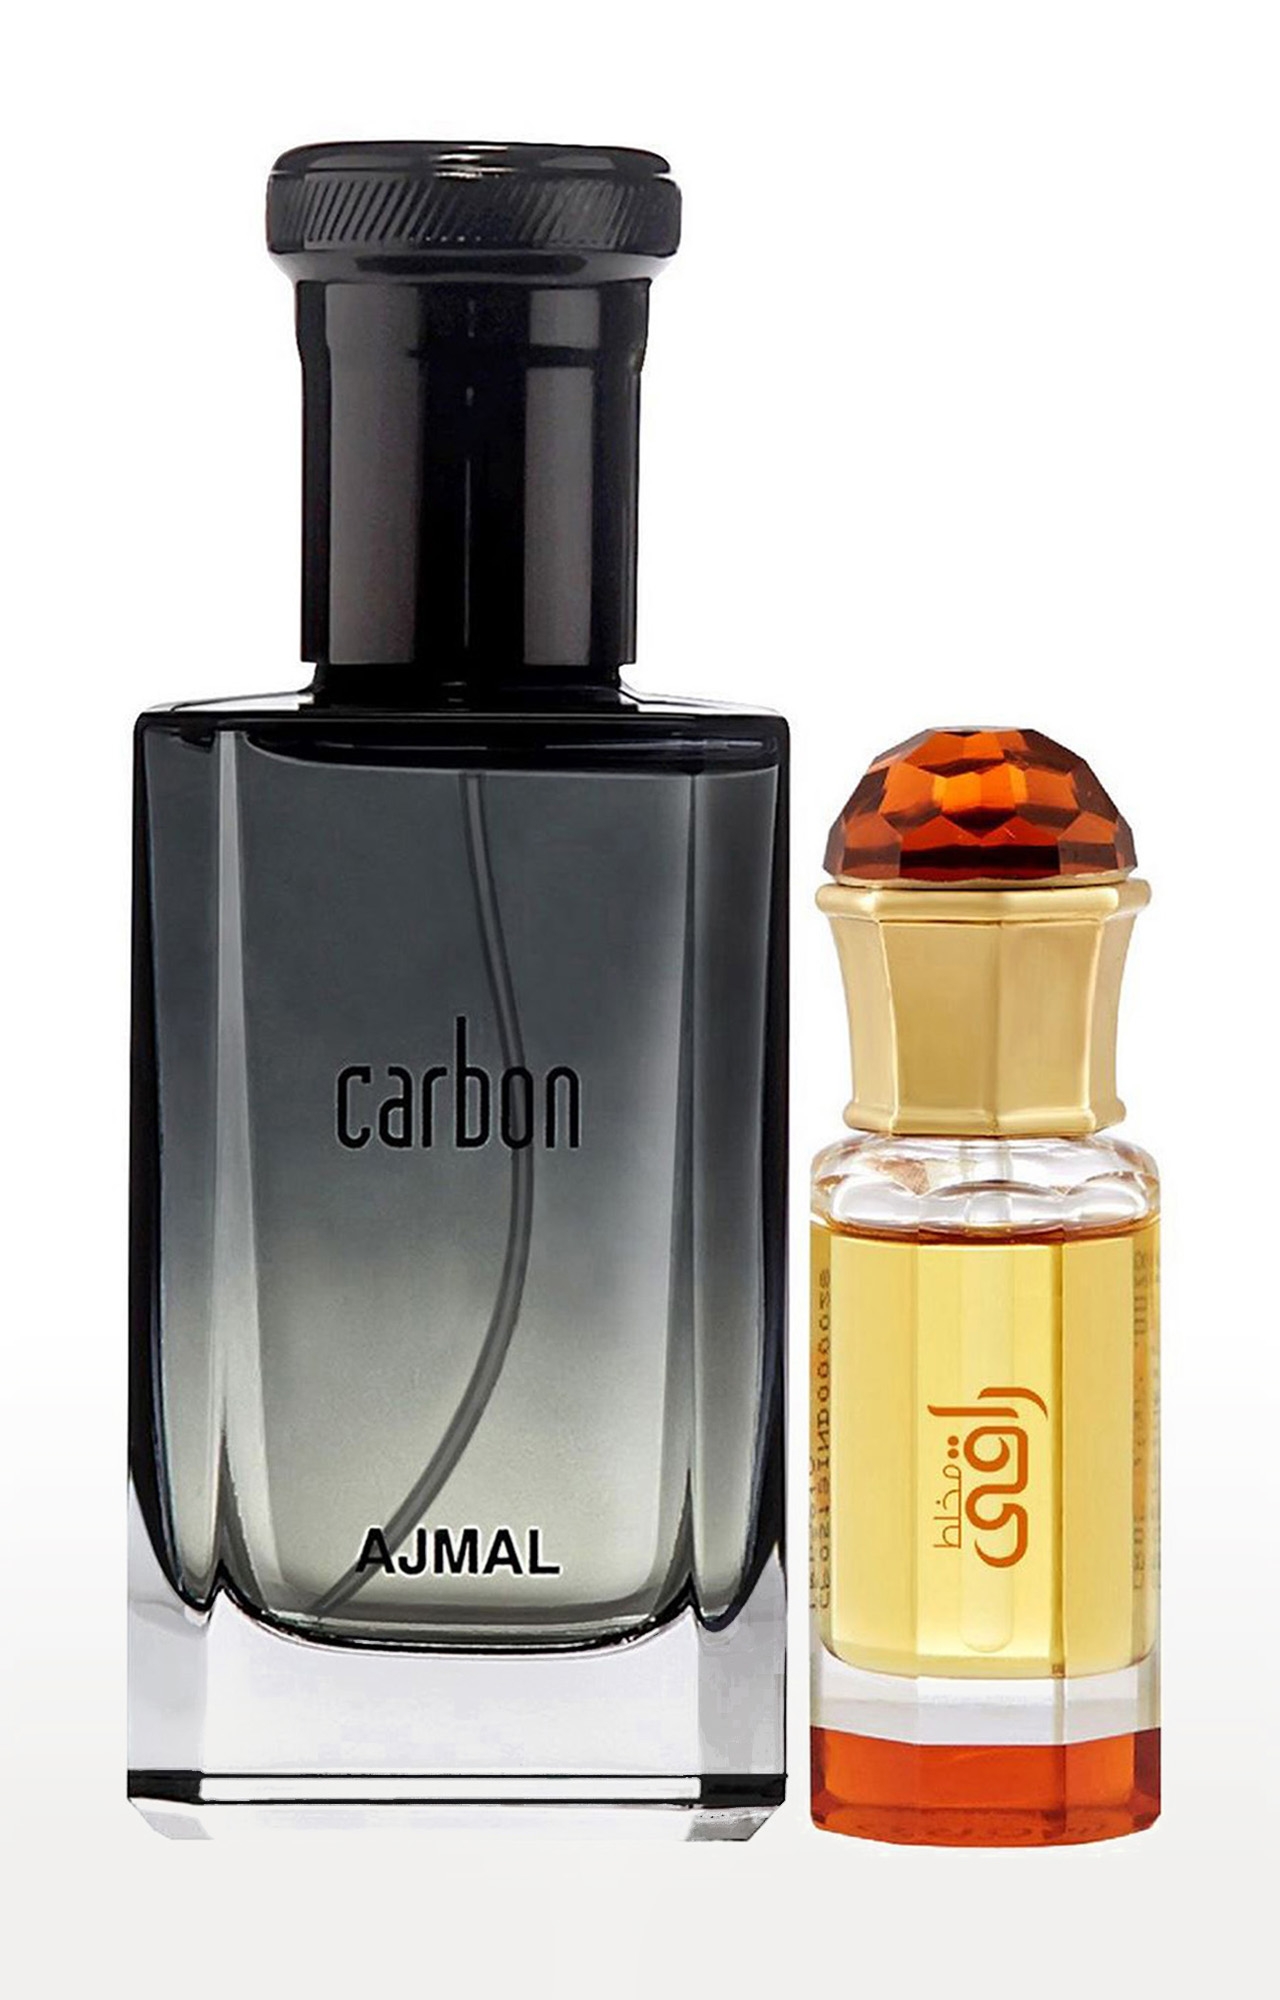 Ajmal | Ajmal Carbon Edp Citrus Spicy Perfume 100Ml For Men And Mukhallat Raaqi Concentrated Perfume Oil Floral Fruity Alcohol- Attar 10Ml For Unisex